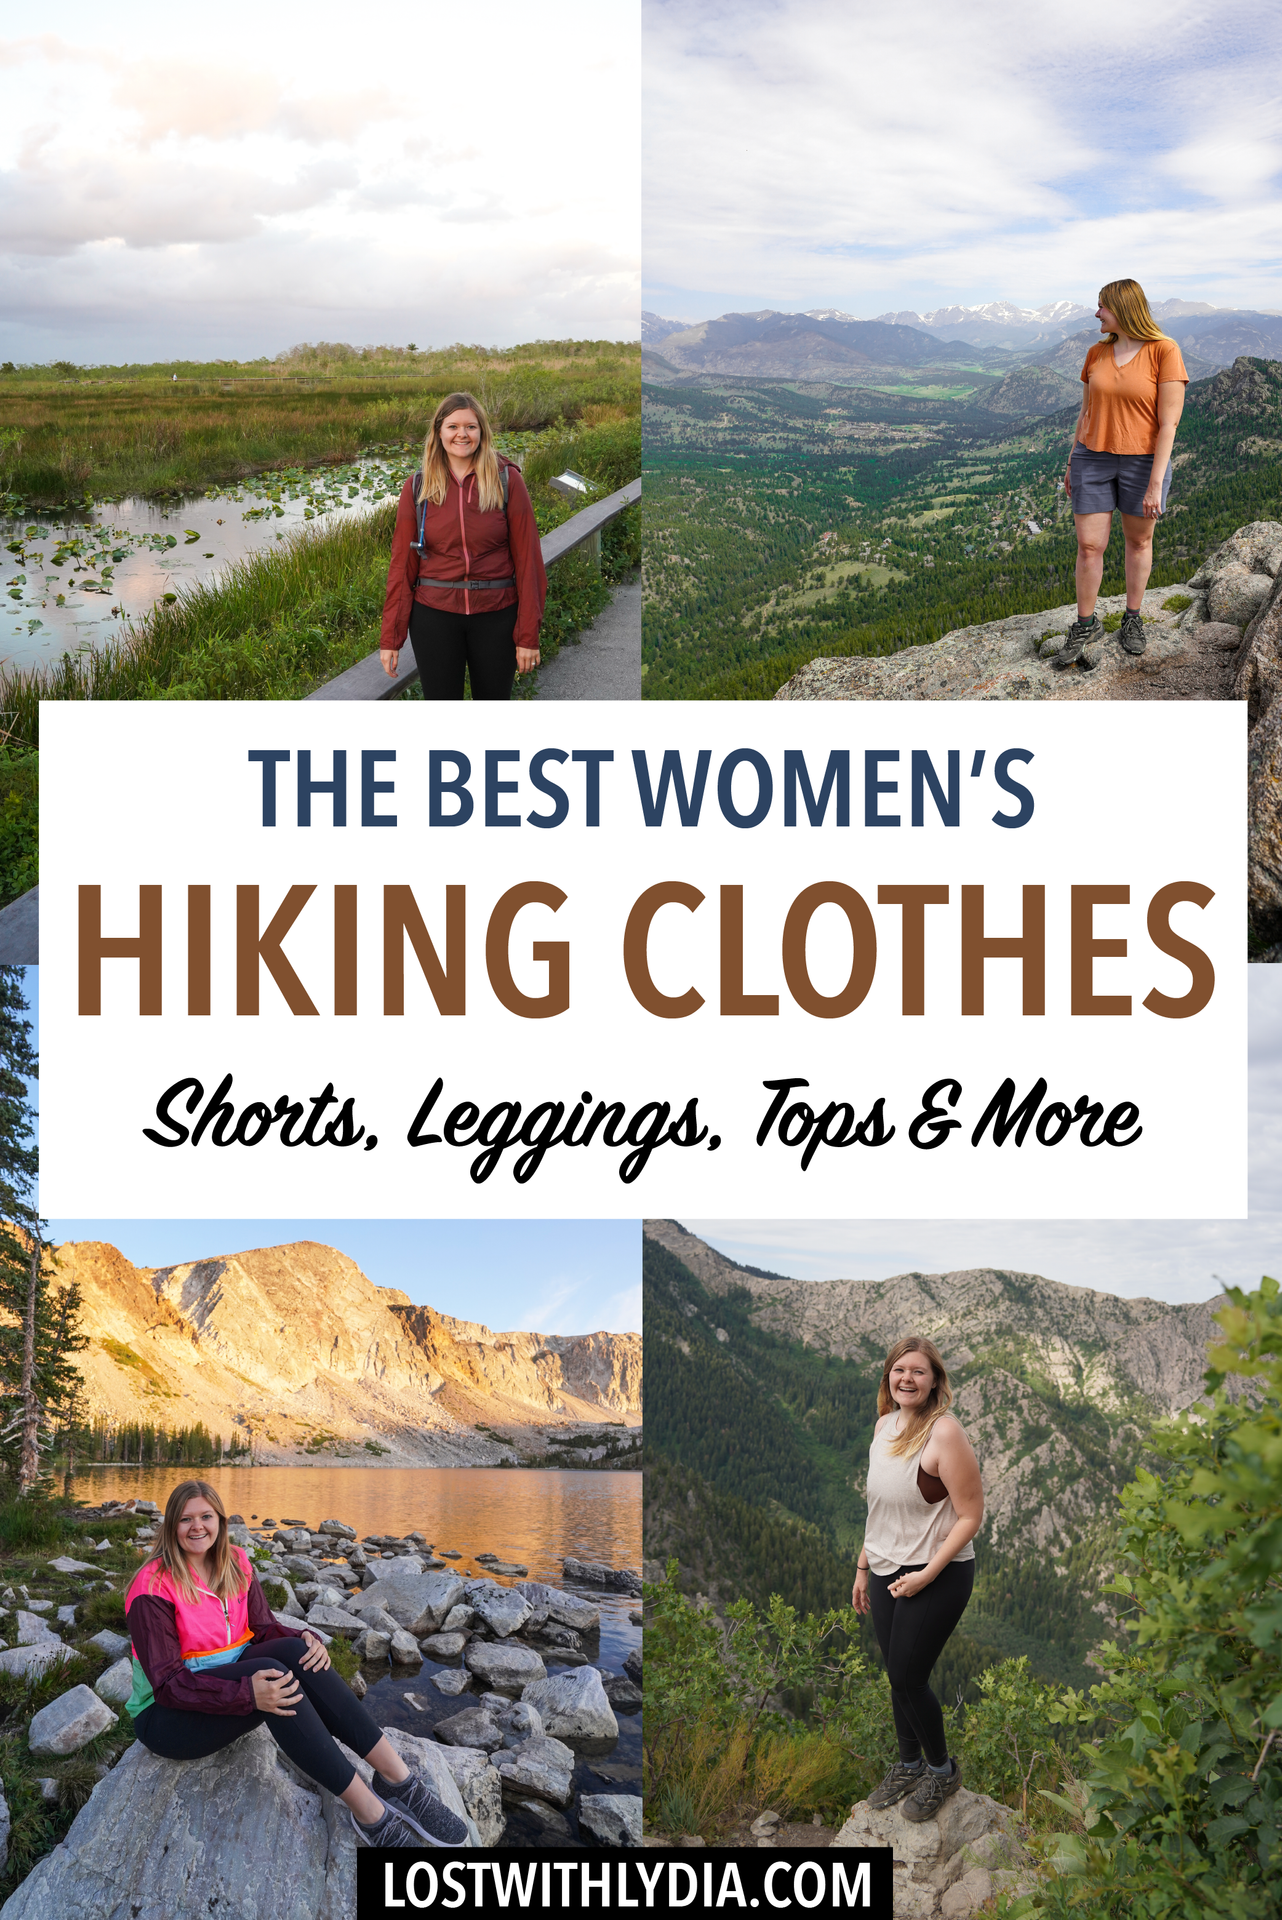 The Best Women's Hiking Clothes: Shorts, Tops, Leggings & More